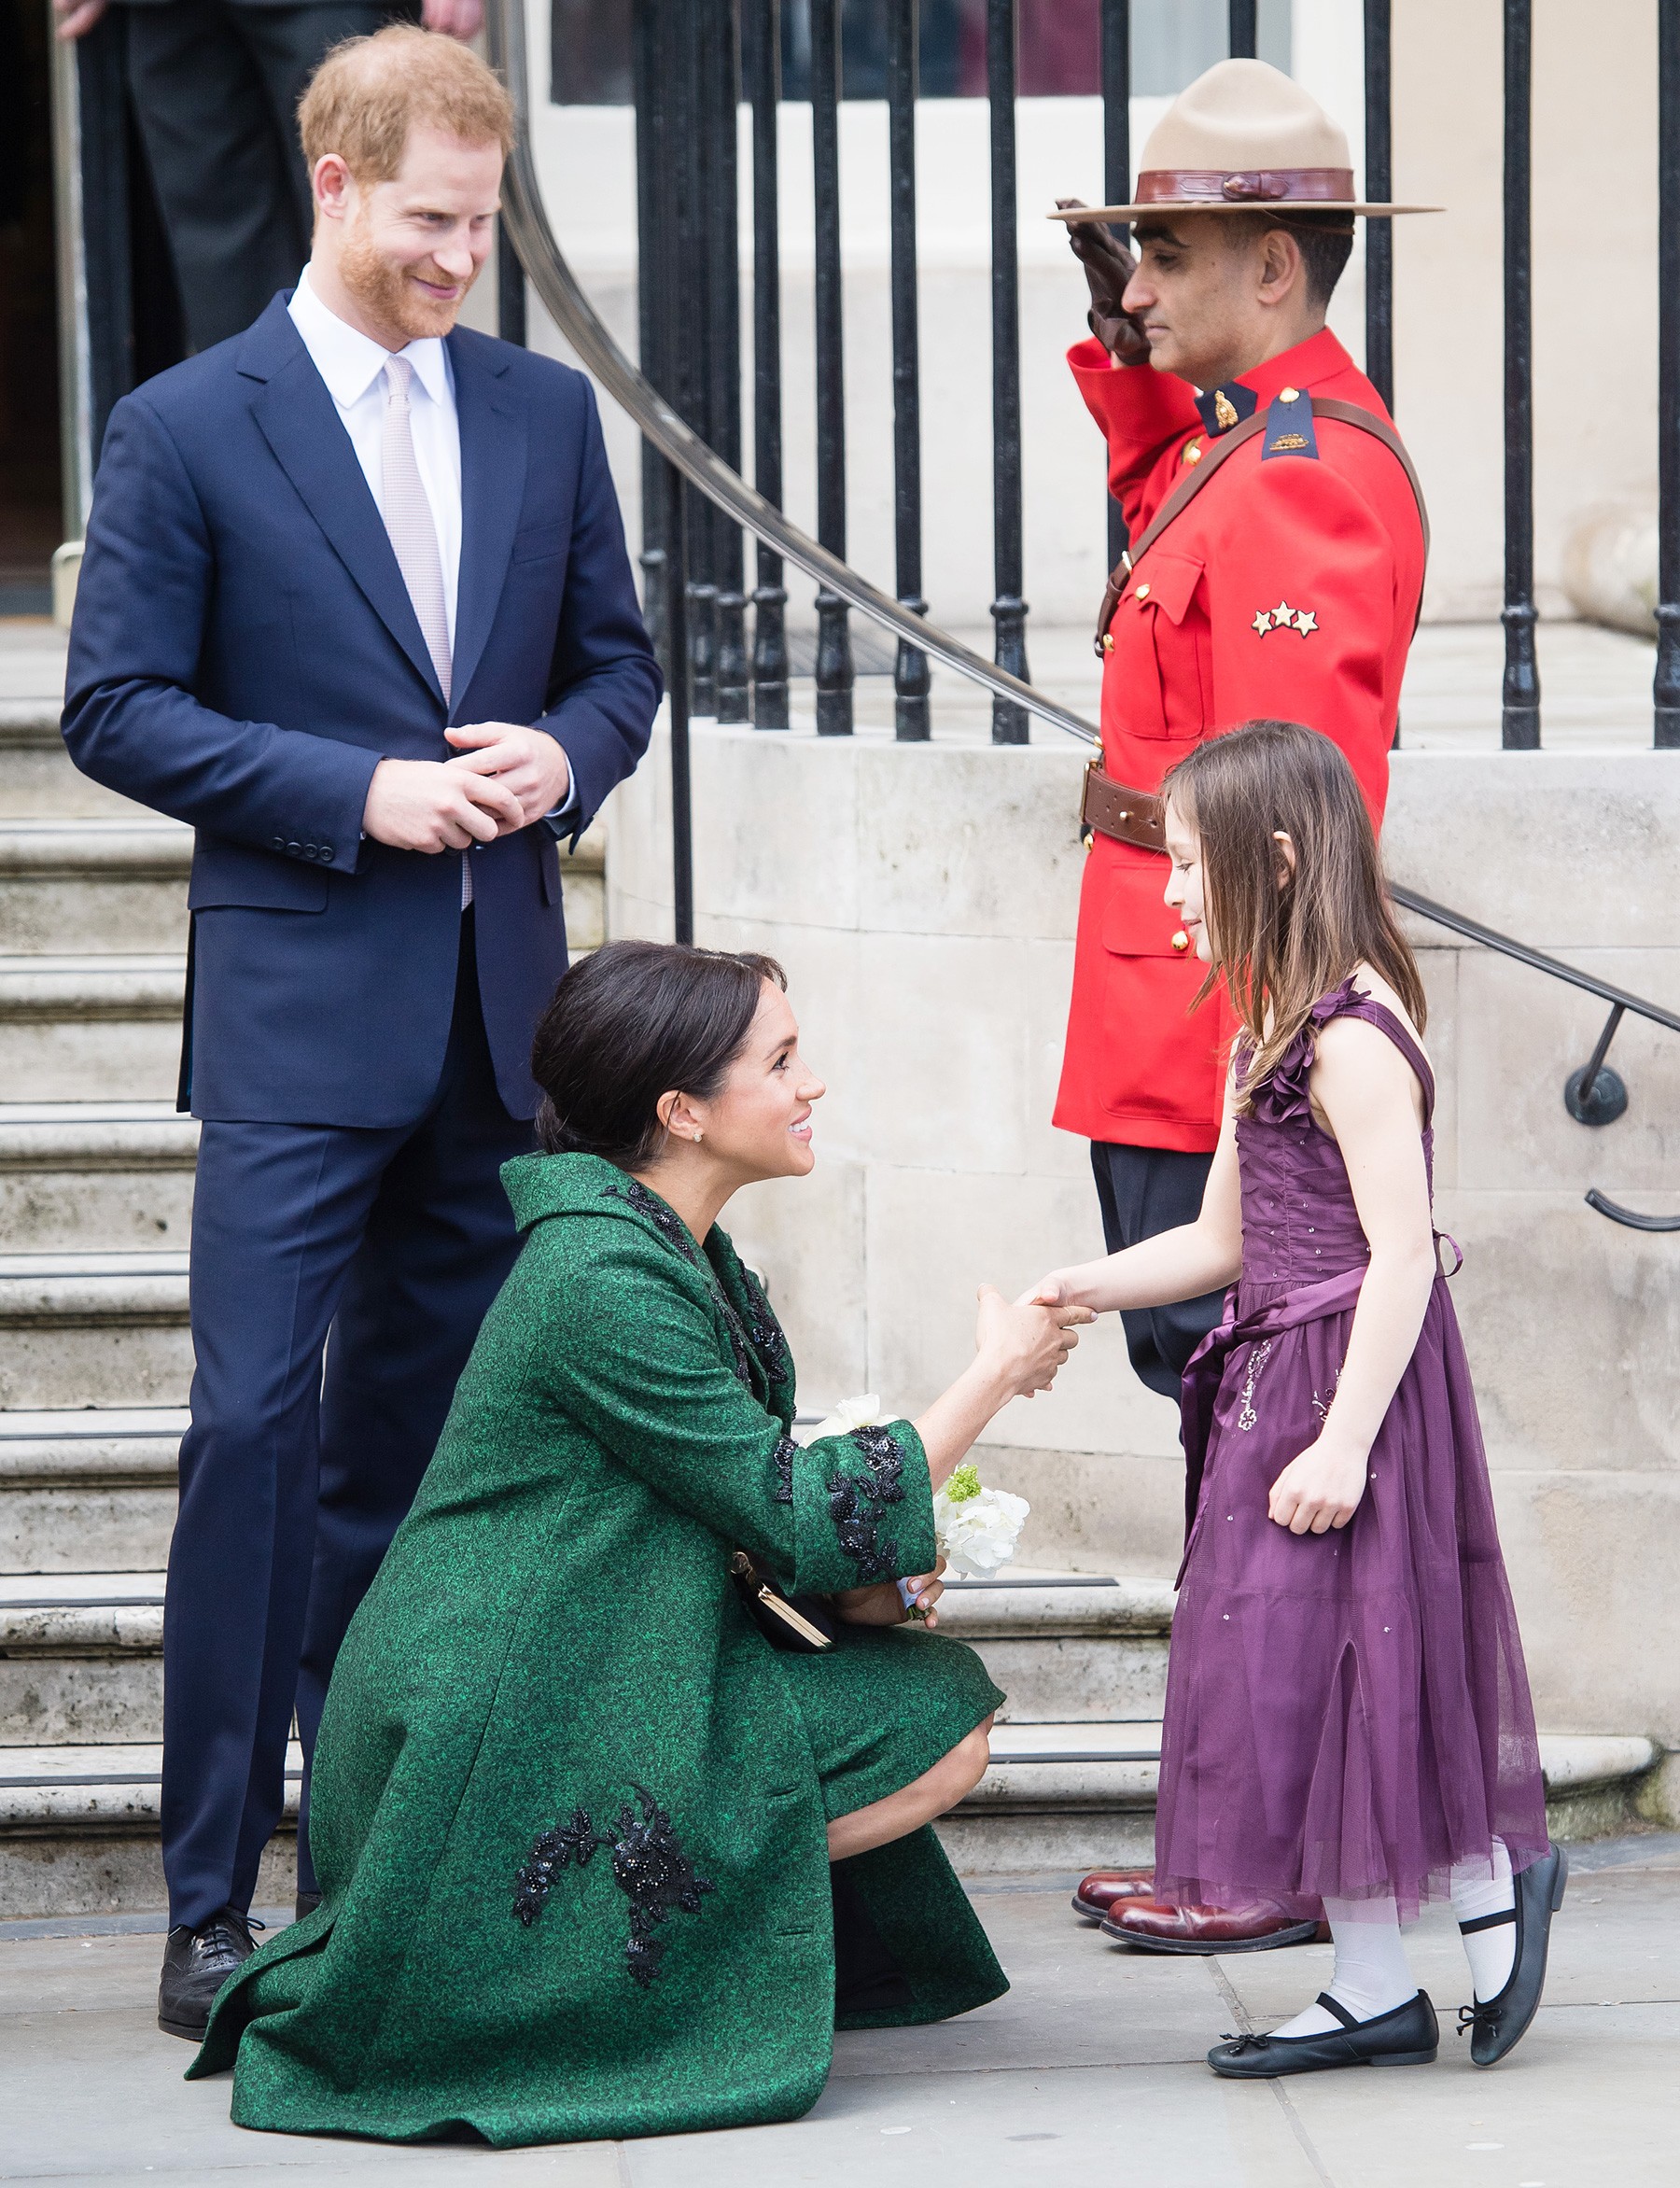 LONDON, ENGLAND - MARCH 11: Prince Harry, Duke of Sussex and Meghan, Duchess of Sussex attend a Commonwealth Day Youth Event at Canada House on March 11, 2019 in London, England. The event will showcased and celebrated the diverse community of young Canad (Foto: Samir Hussein/WireImage)